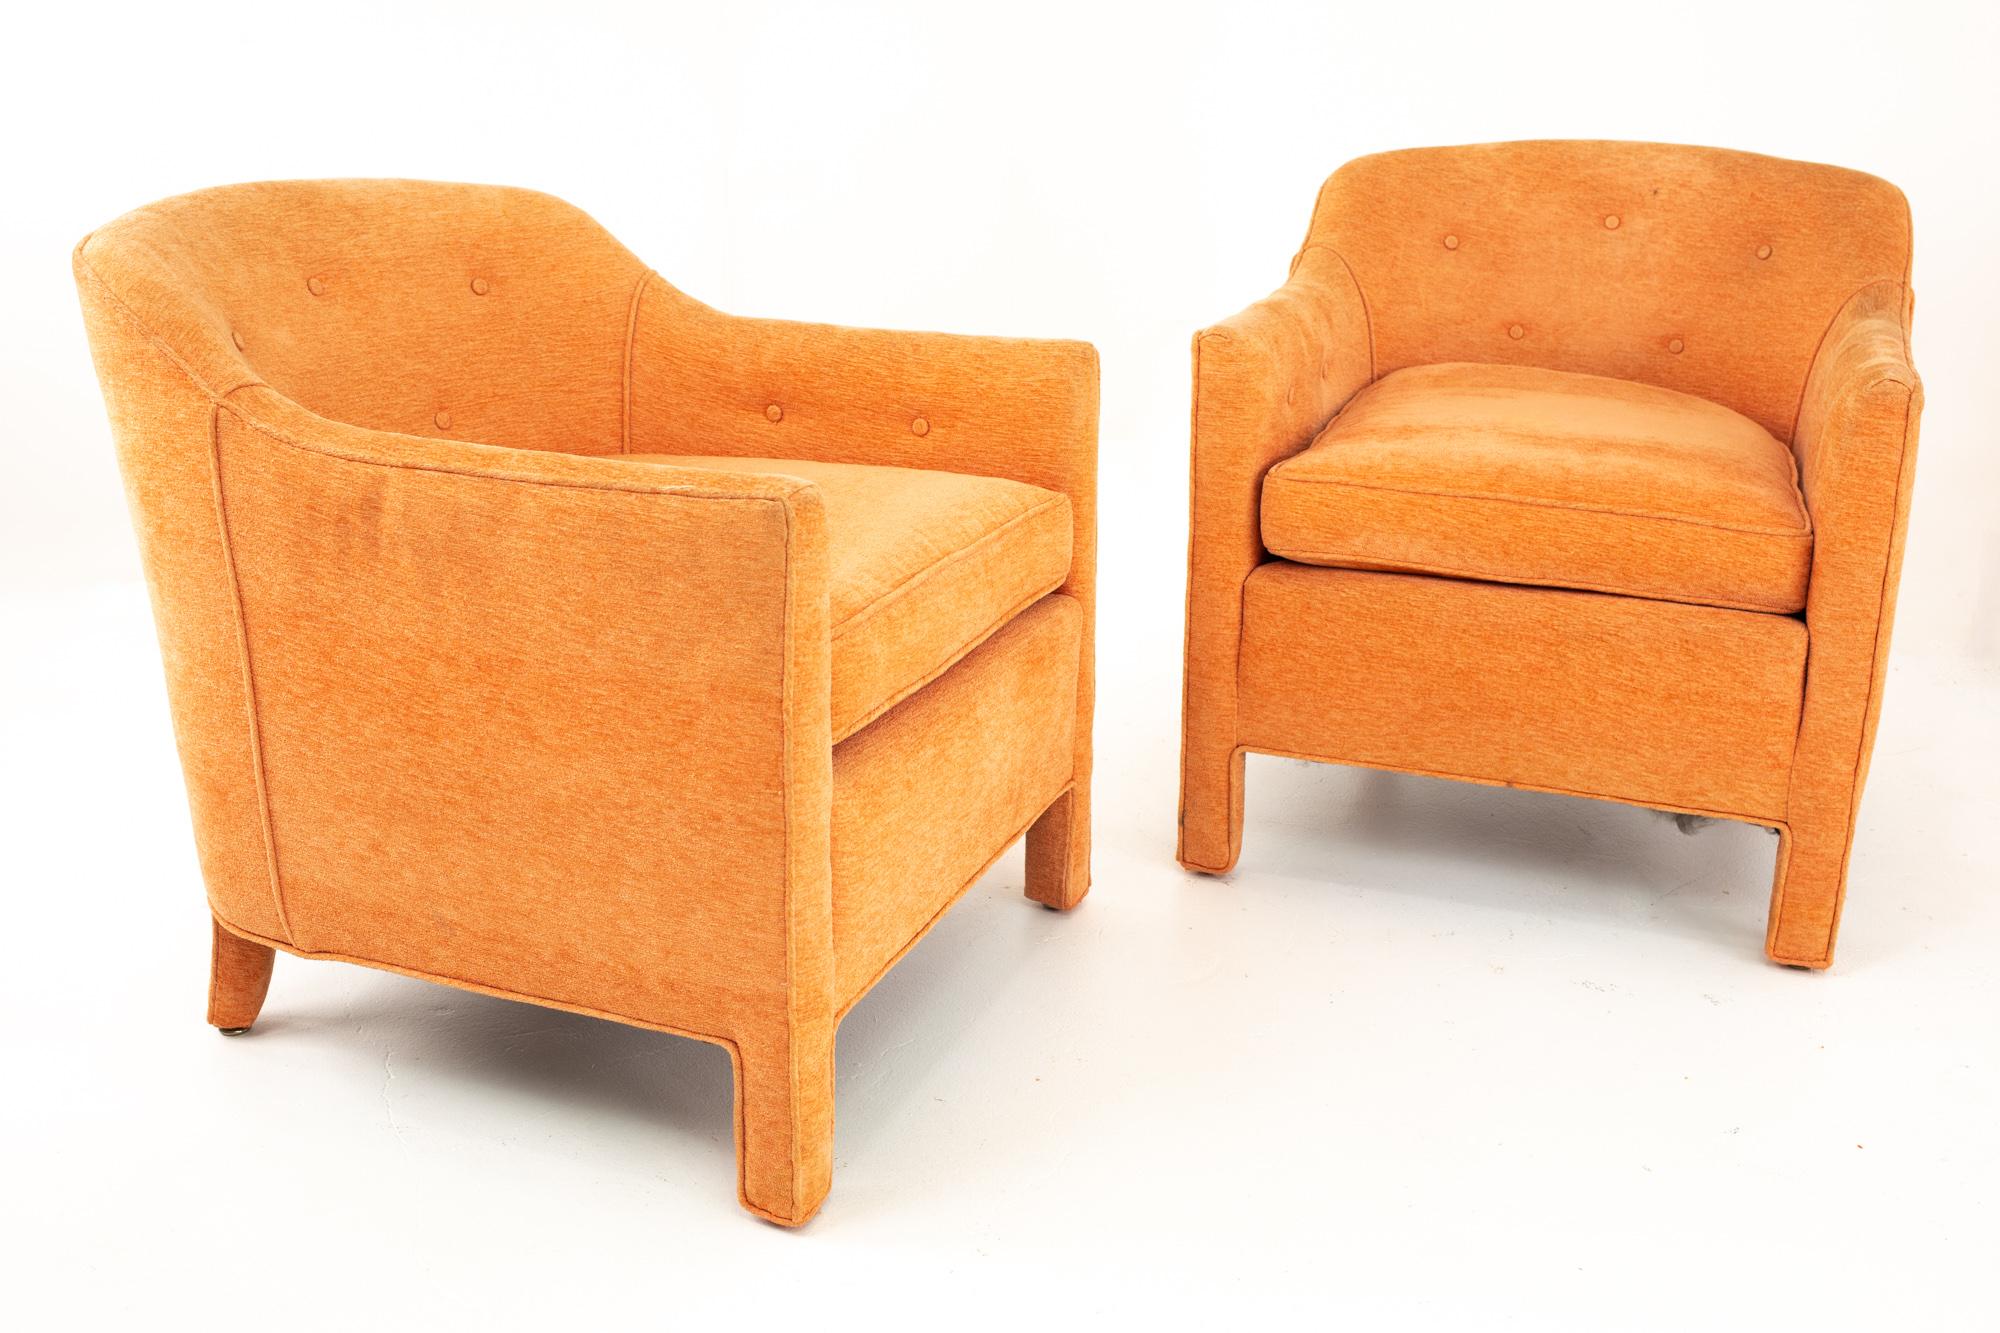 Edward Wormley for Dunbar style Mid Century Barrel chairs - Pair
Each chair measures: 25 wide x 28 deep x 28 high with a seat height of 18 inches 

This price includes getting this piece in what we call restored vintage condition. It is thoroughly